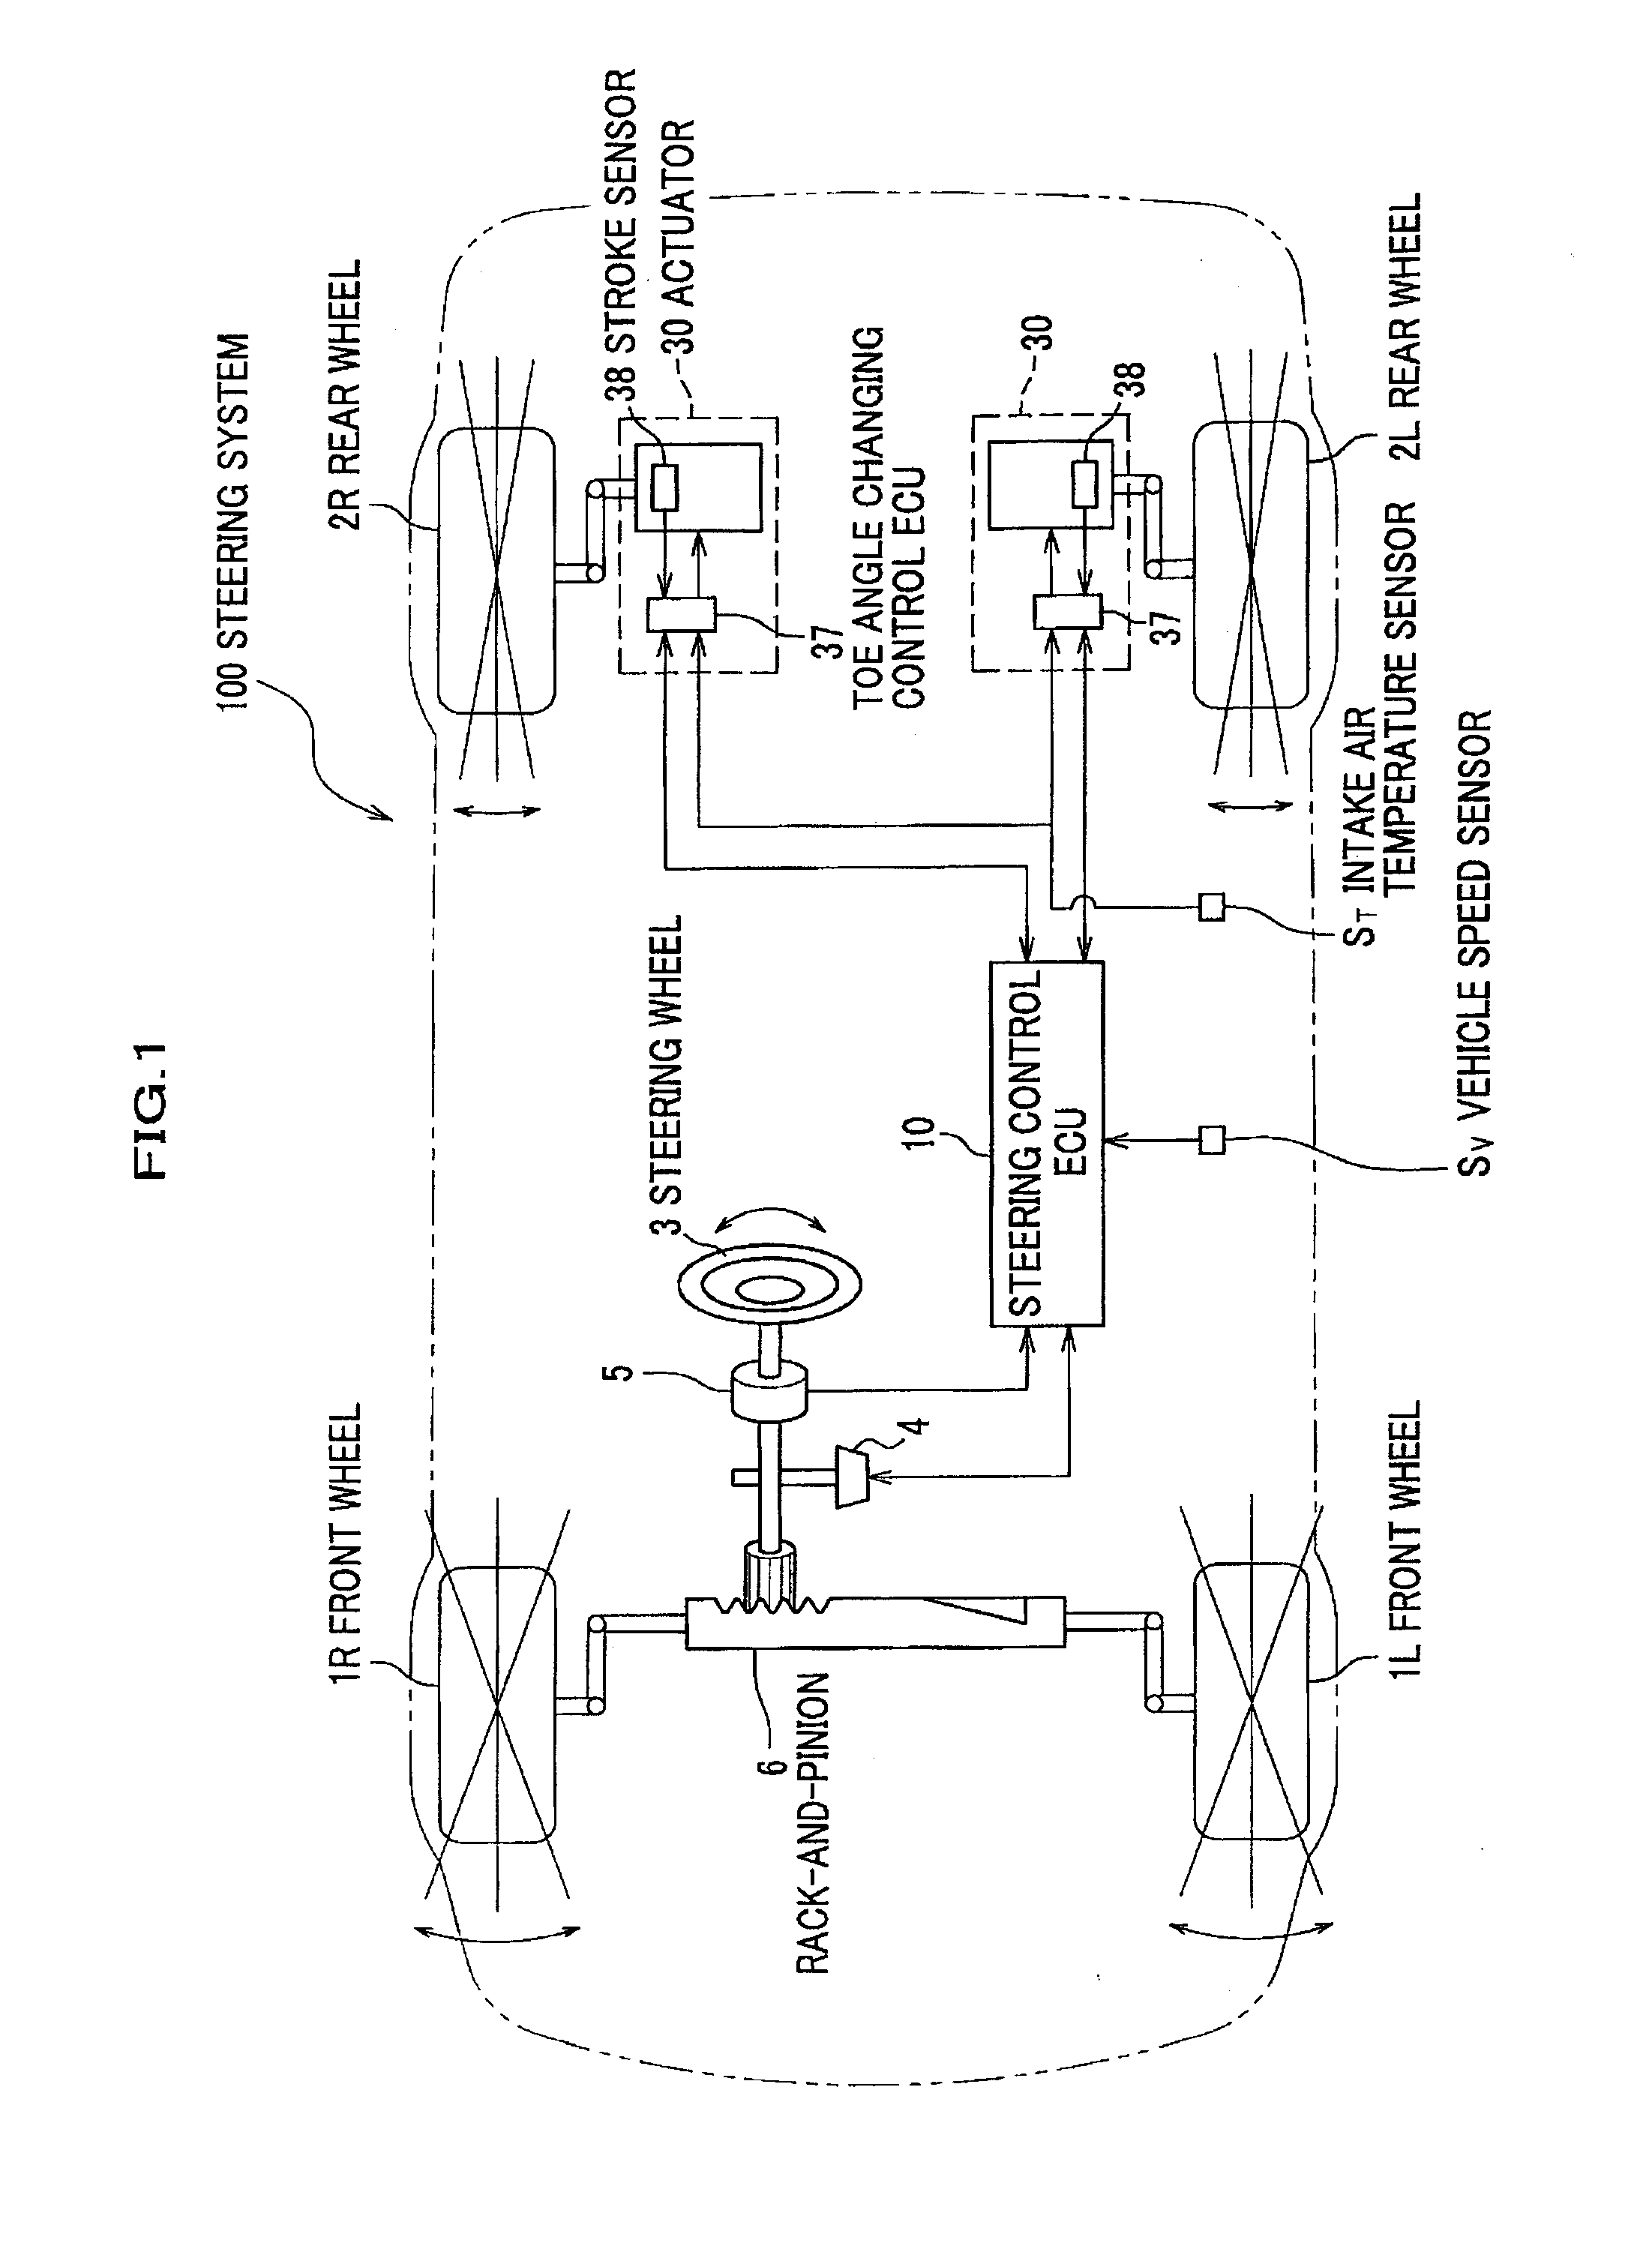 Alignment changing control device